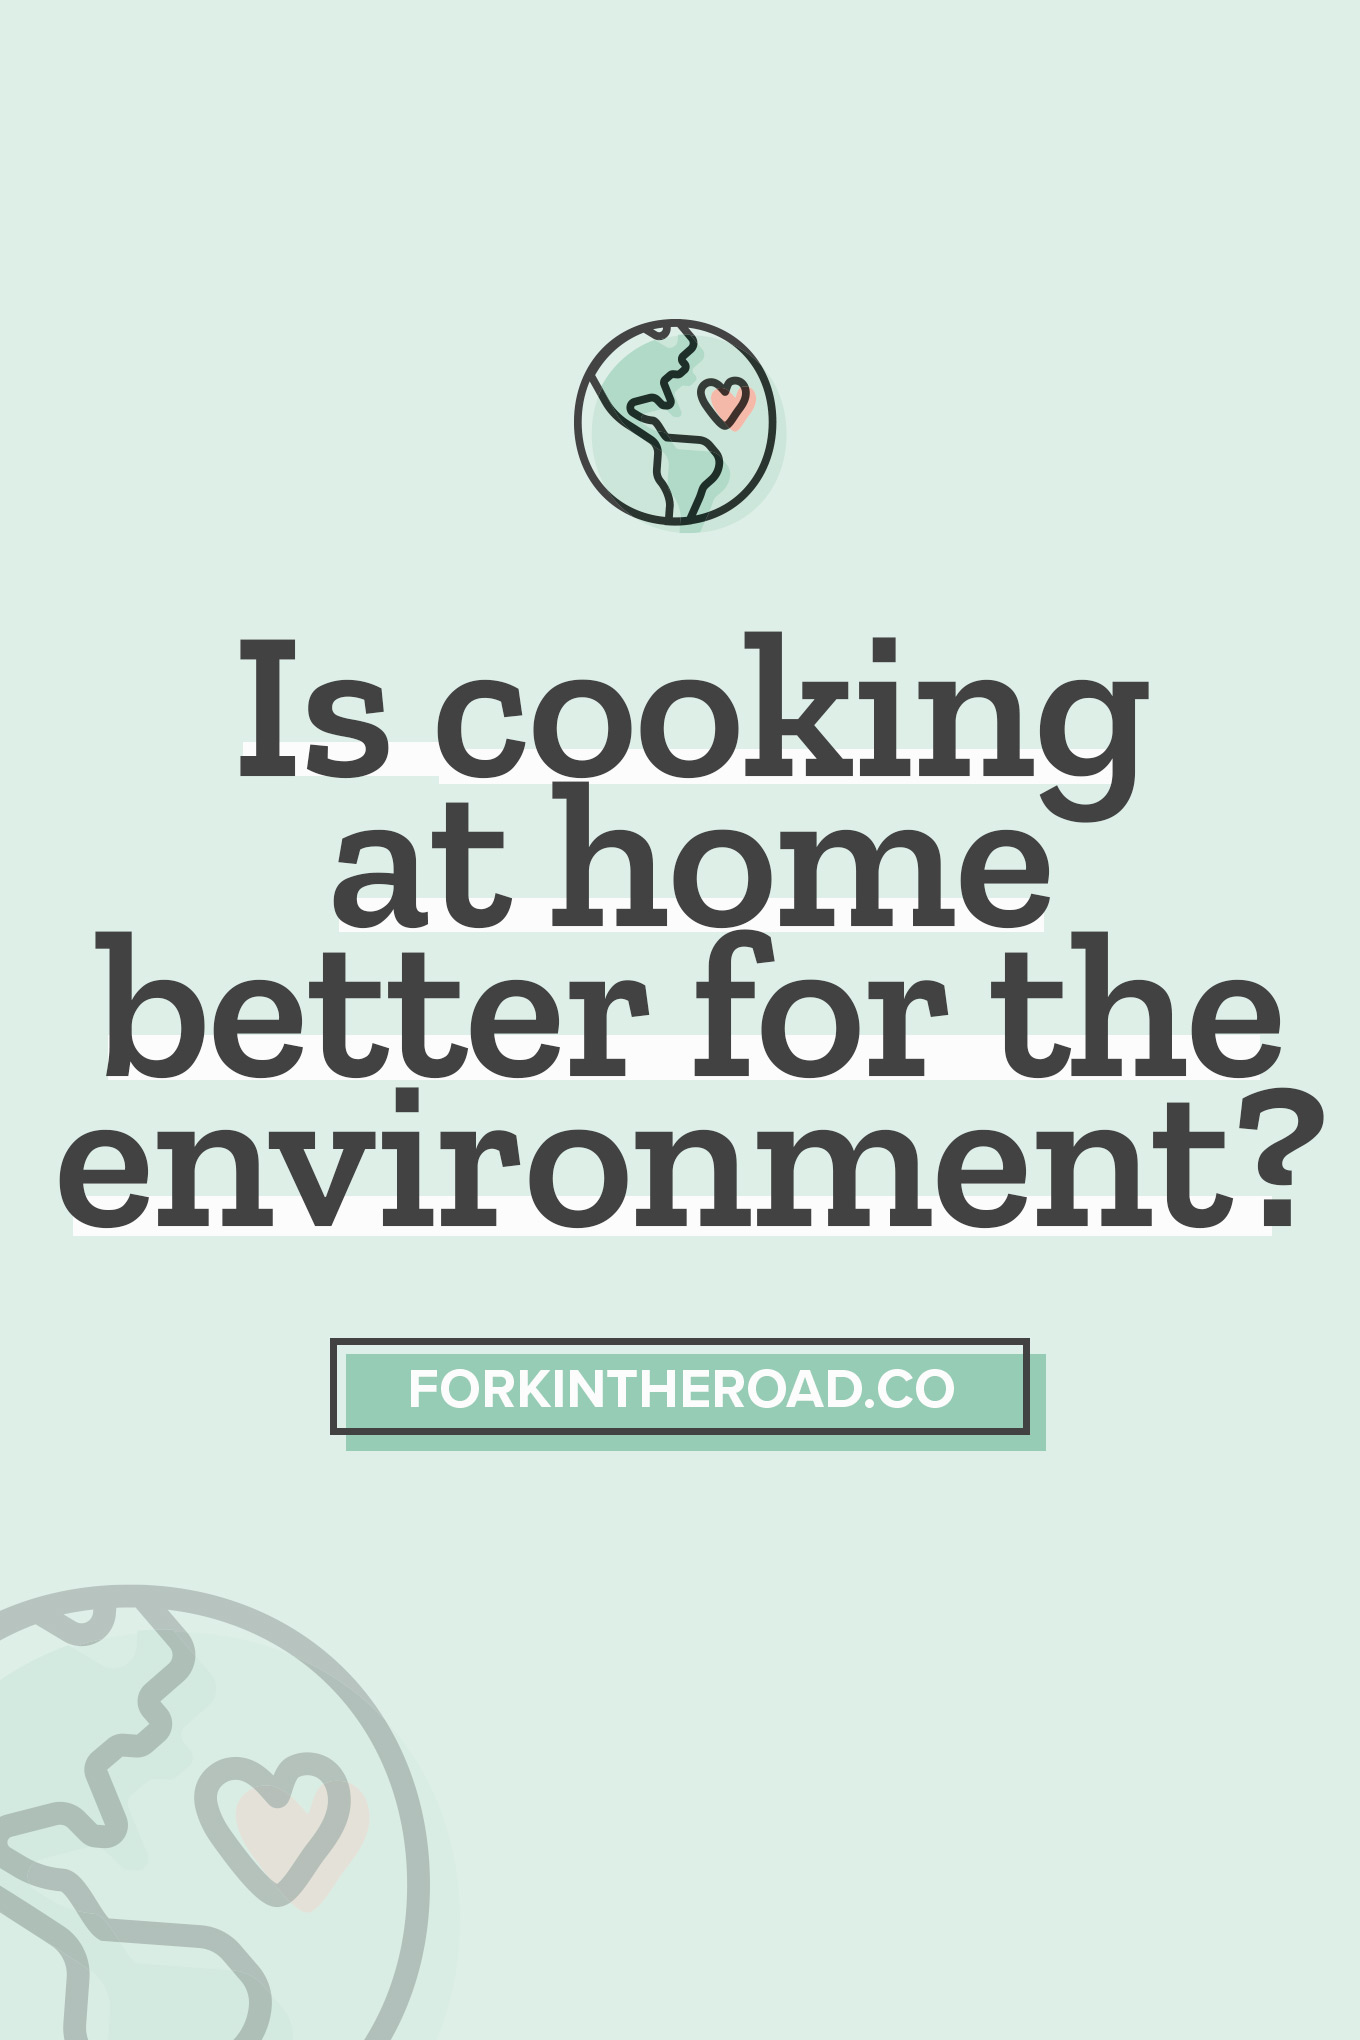 Is Cooking at Home Better for the Environment?